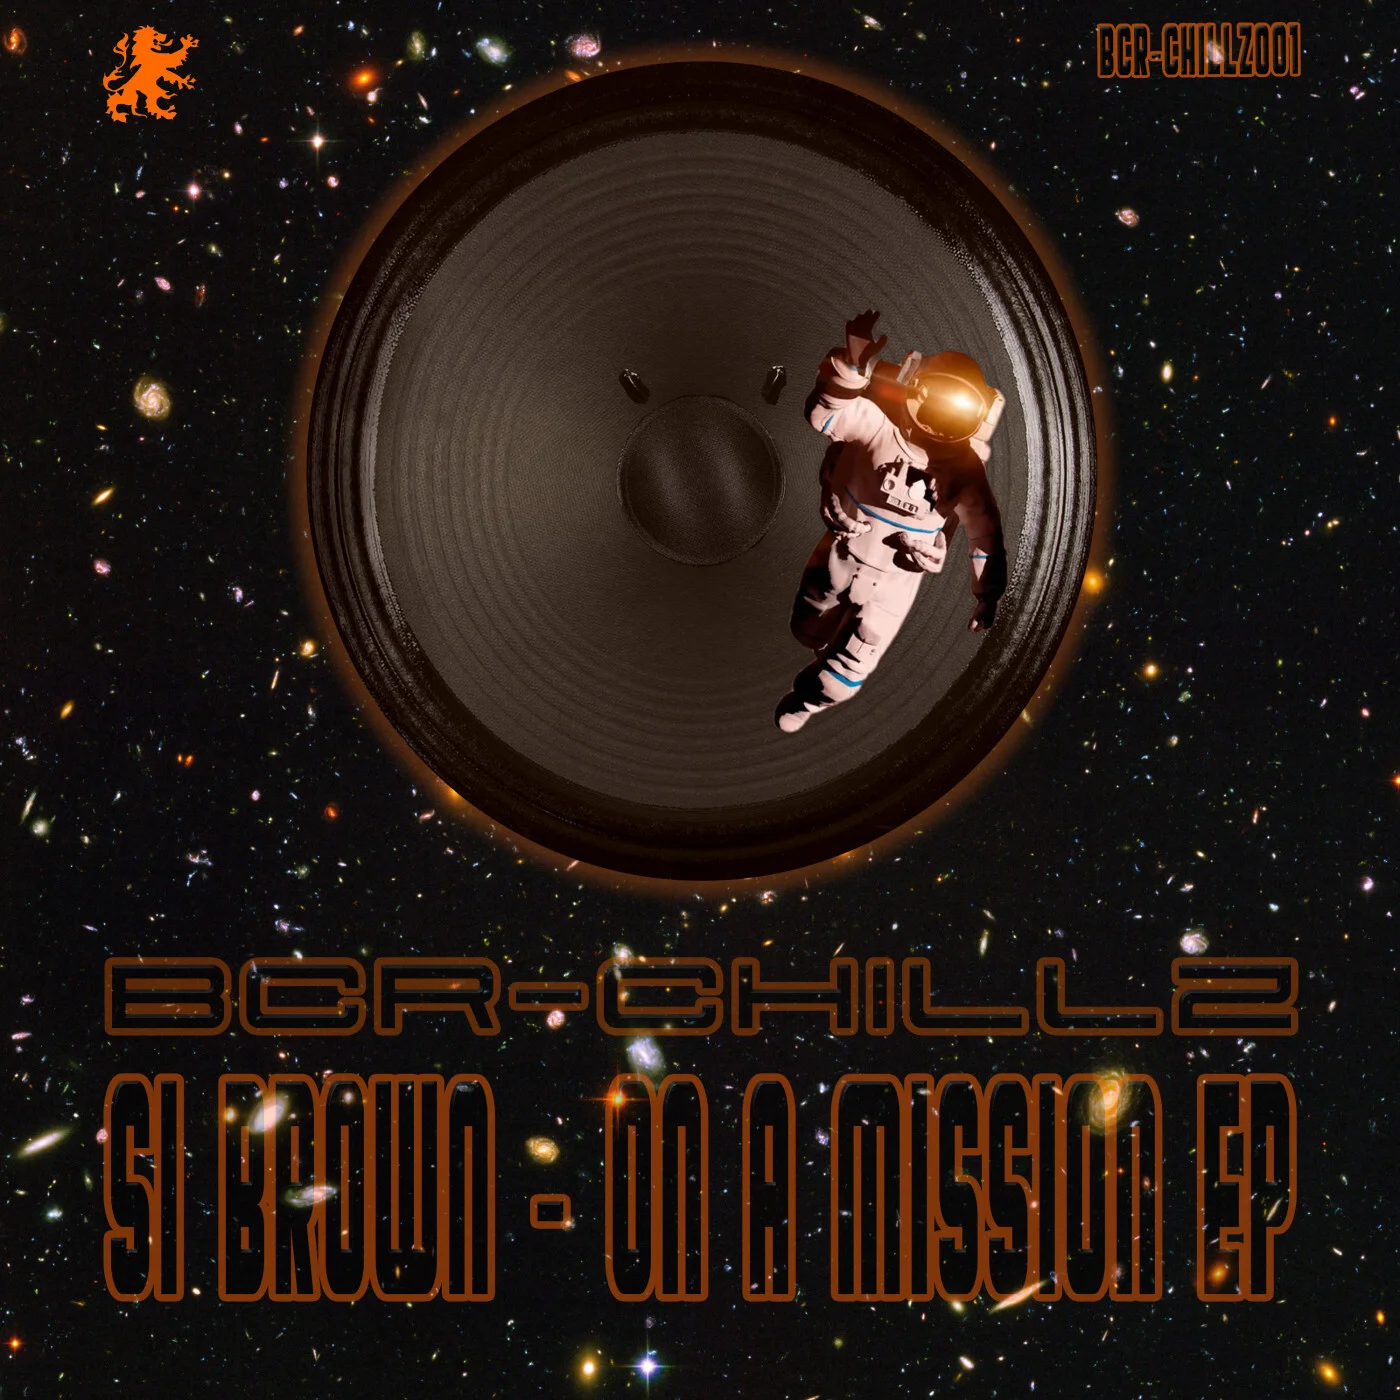 Si Brown – On A Mission EP